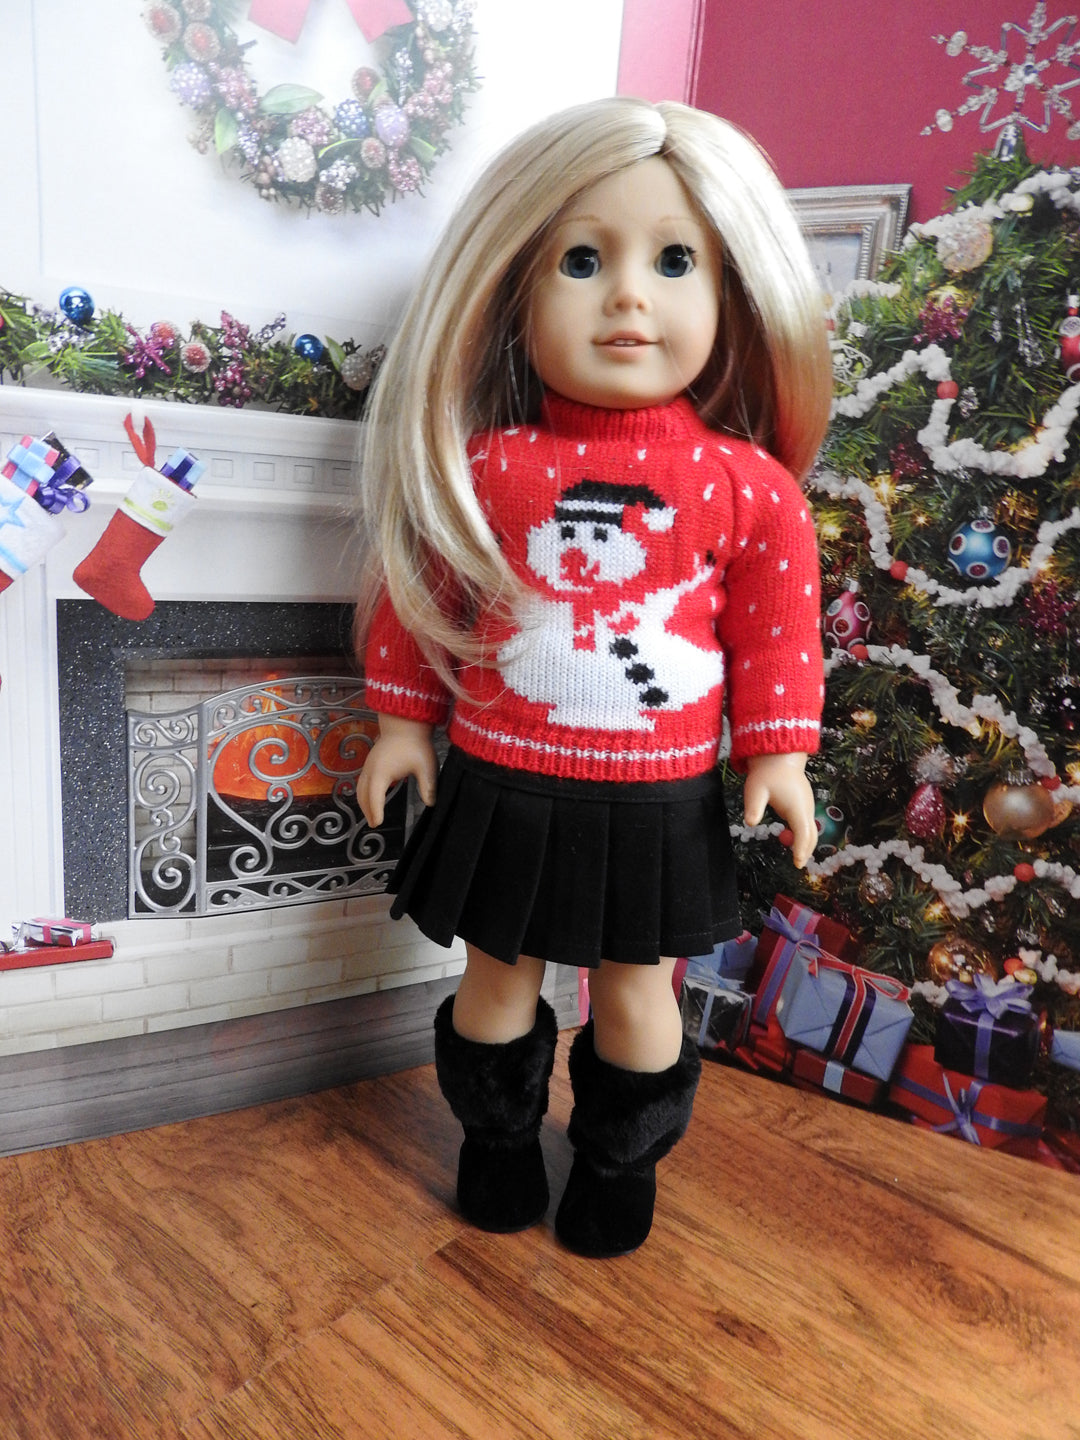 18 Inch Doll Christmas Sweater, Skirt, and Boots – Avanna Girl